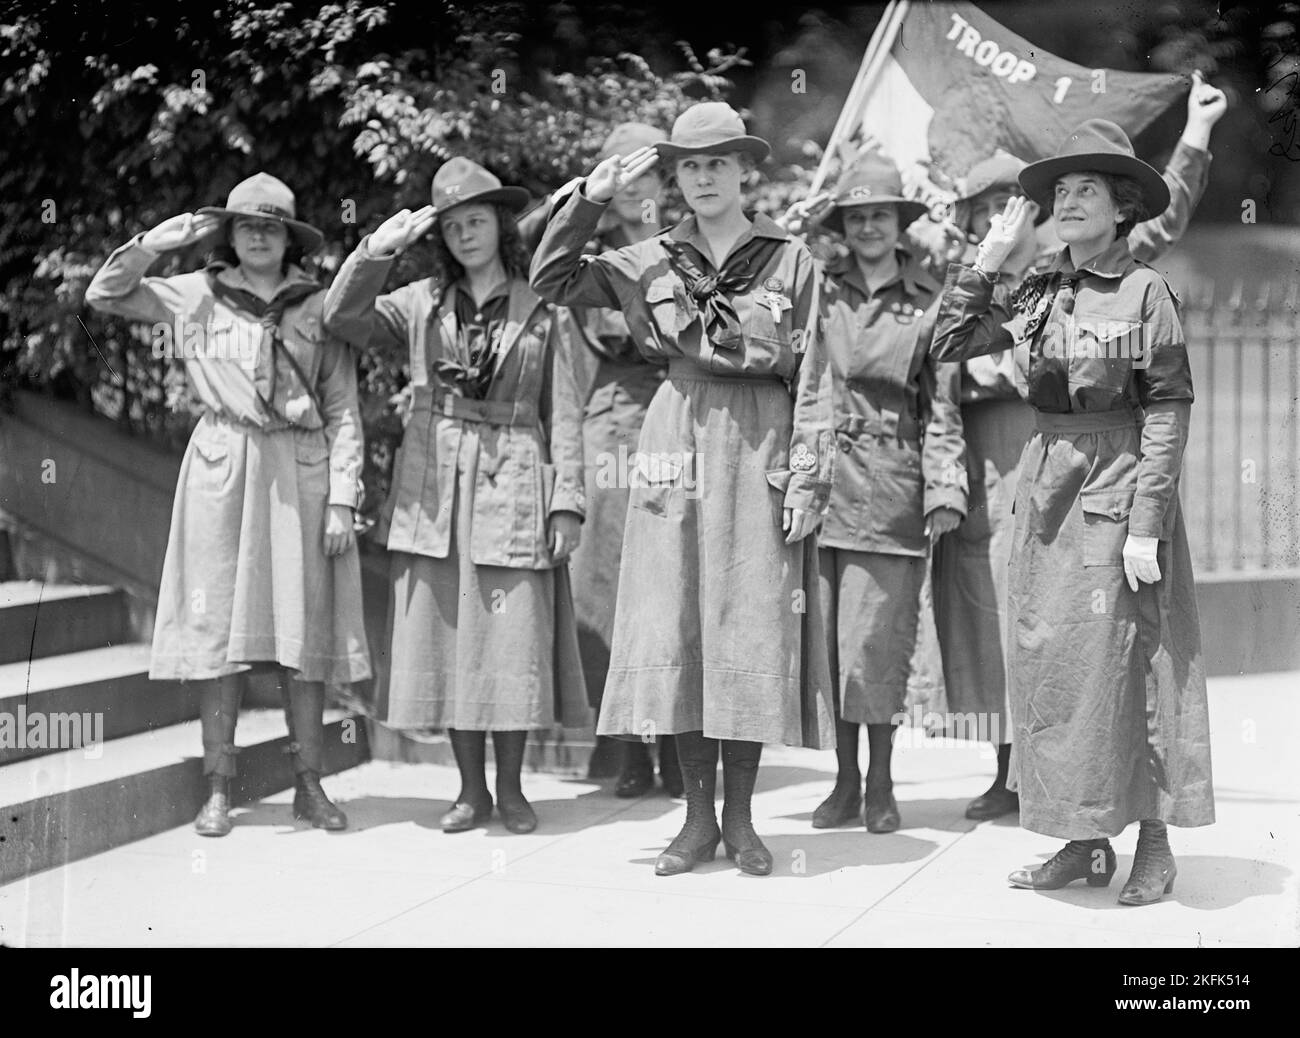 Girl Scouts - Troop #1. Mrs. Juliette Low, Founder, Right; Elenore Putsske, Center; Evaline Glance, 2nd from Right, 1917. Stock Photo